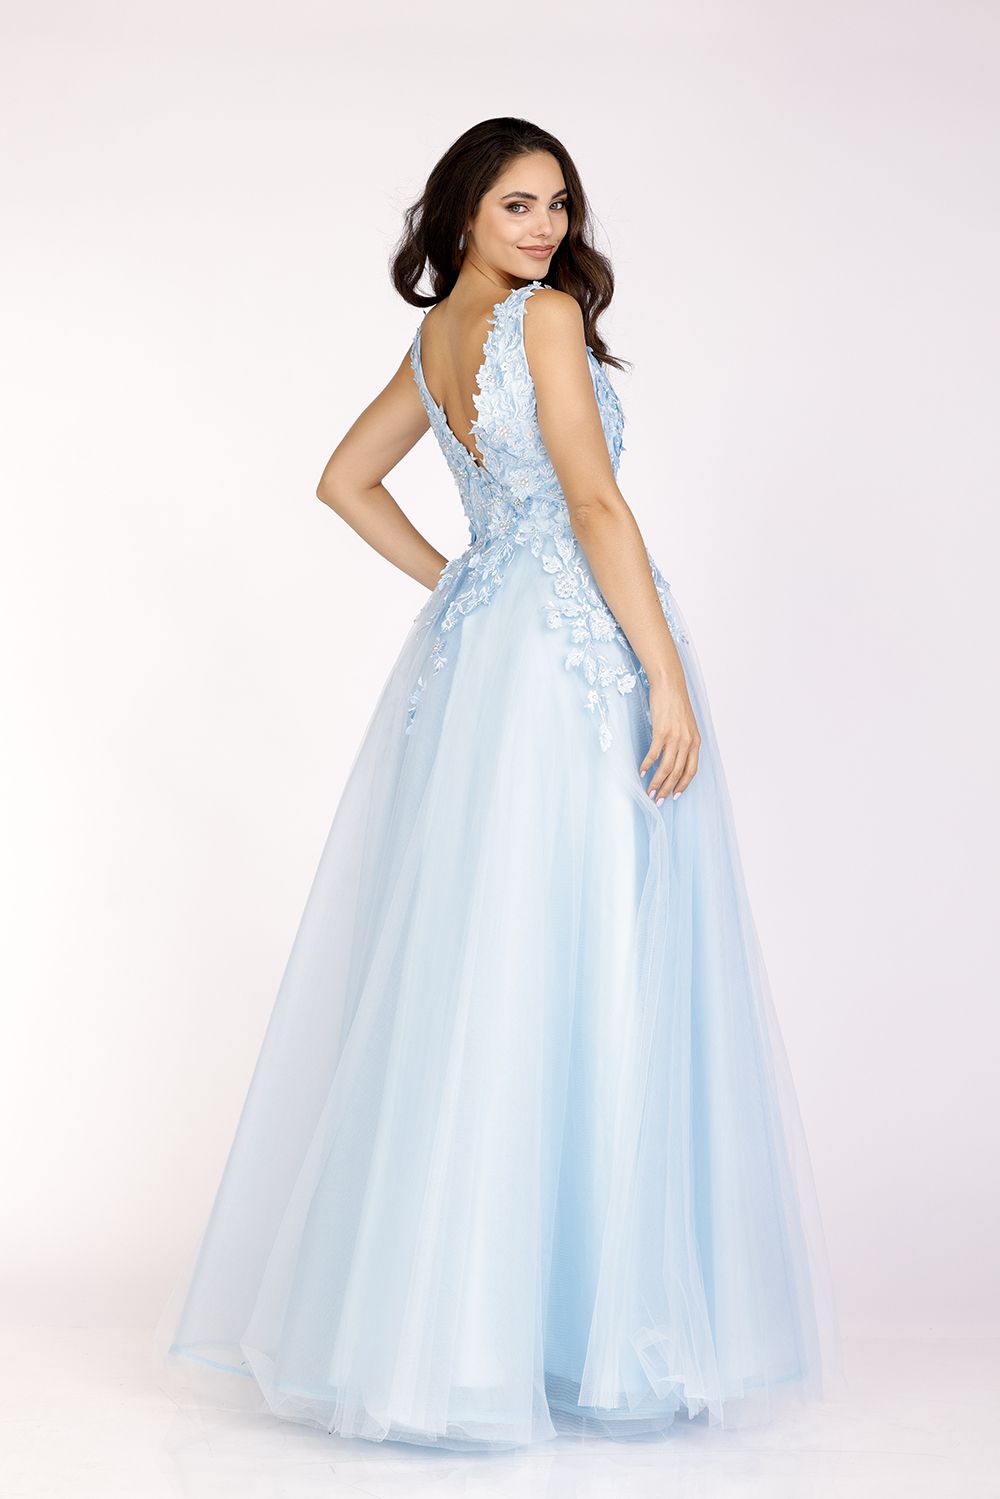 Cecilia Couture 1574 Long A Line Tulle Ball gown Prom Dress #d Lace V Neck Prom Dress Lace-applied Sleeveless Plunging V-neck Ball Gown from Cecilia Couture Dozens of compliments will come your way when you walk through the party wearing this breathtaking long dress from Cecilia Couture. Fashioned with a plunging V-neckline with a mesh inset on the front, 